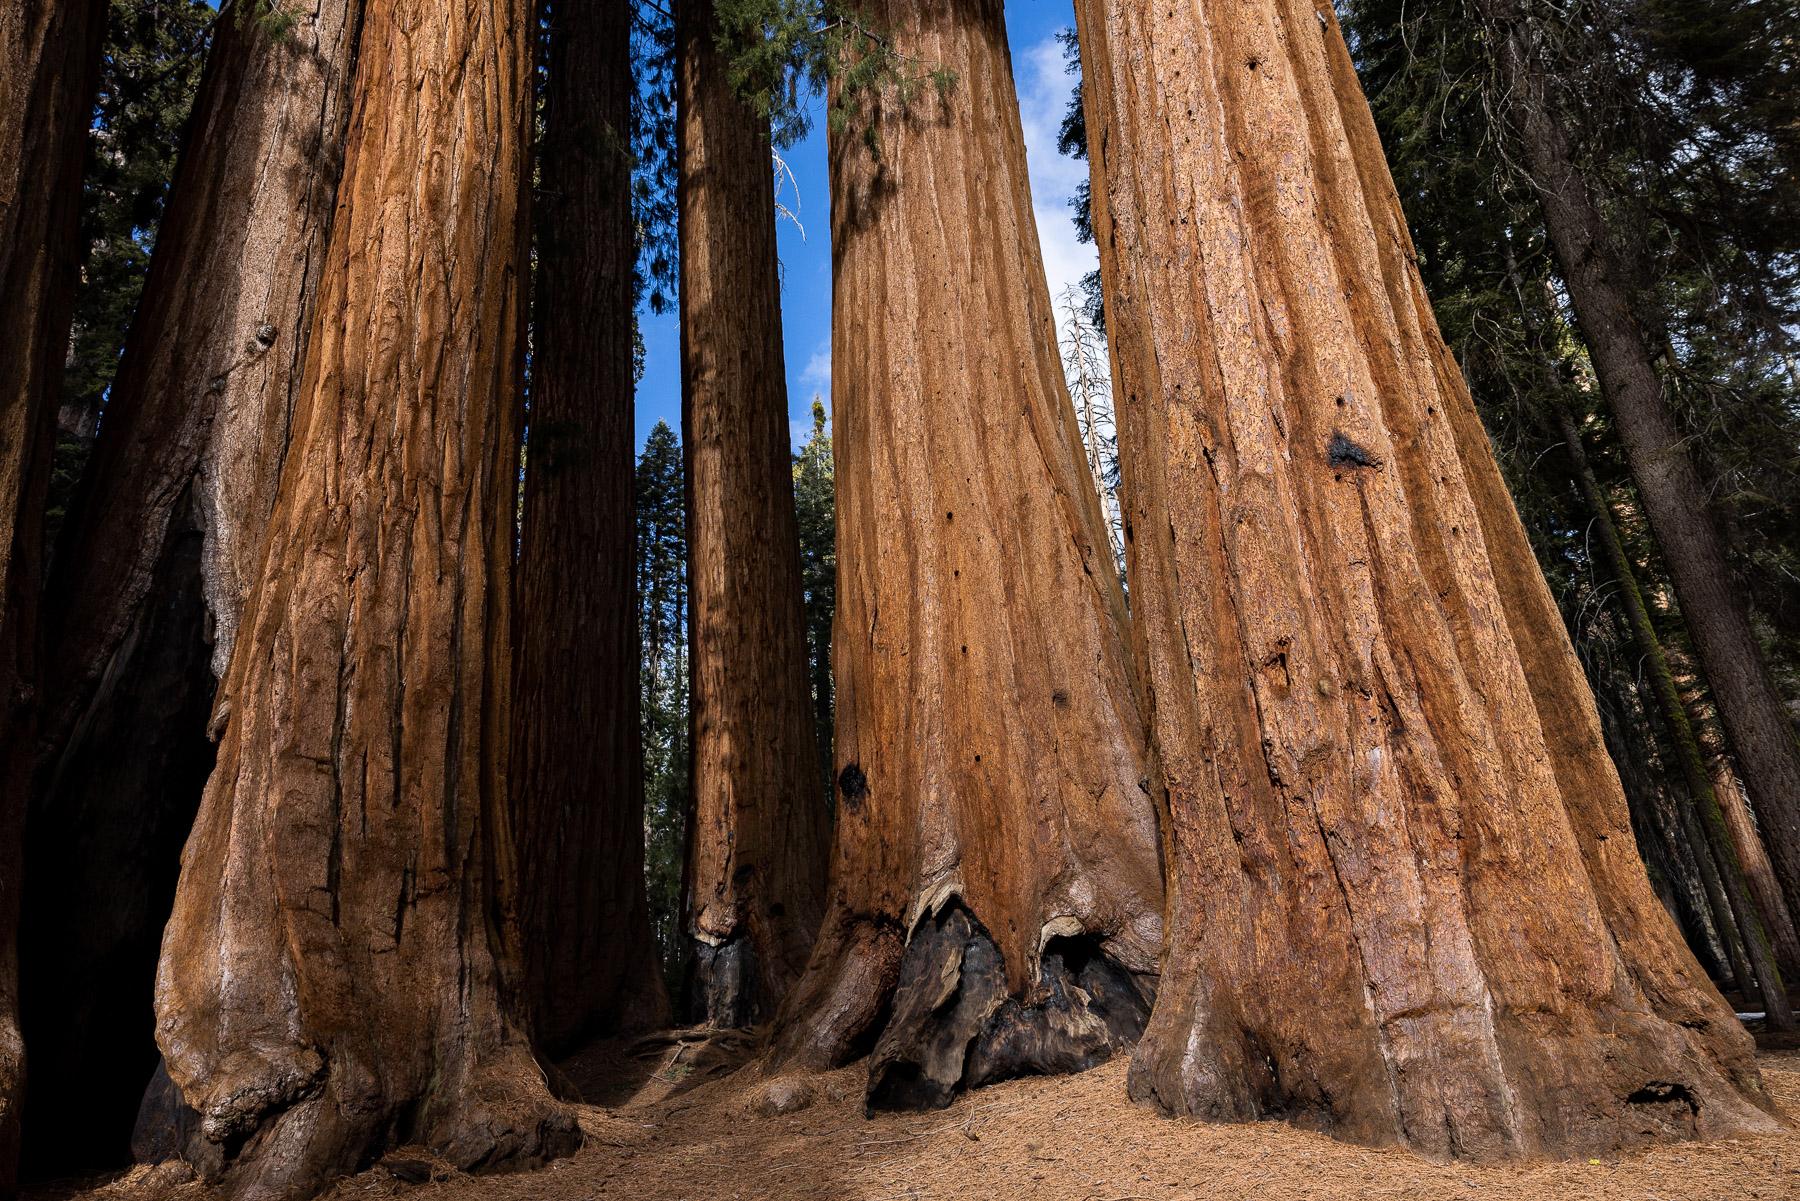 - Sequoia, a year in a burning forest - The Parker group in Giant forest Sequioa national park.